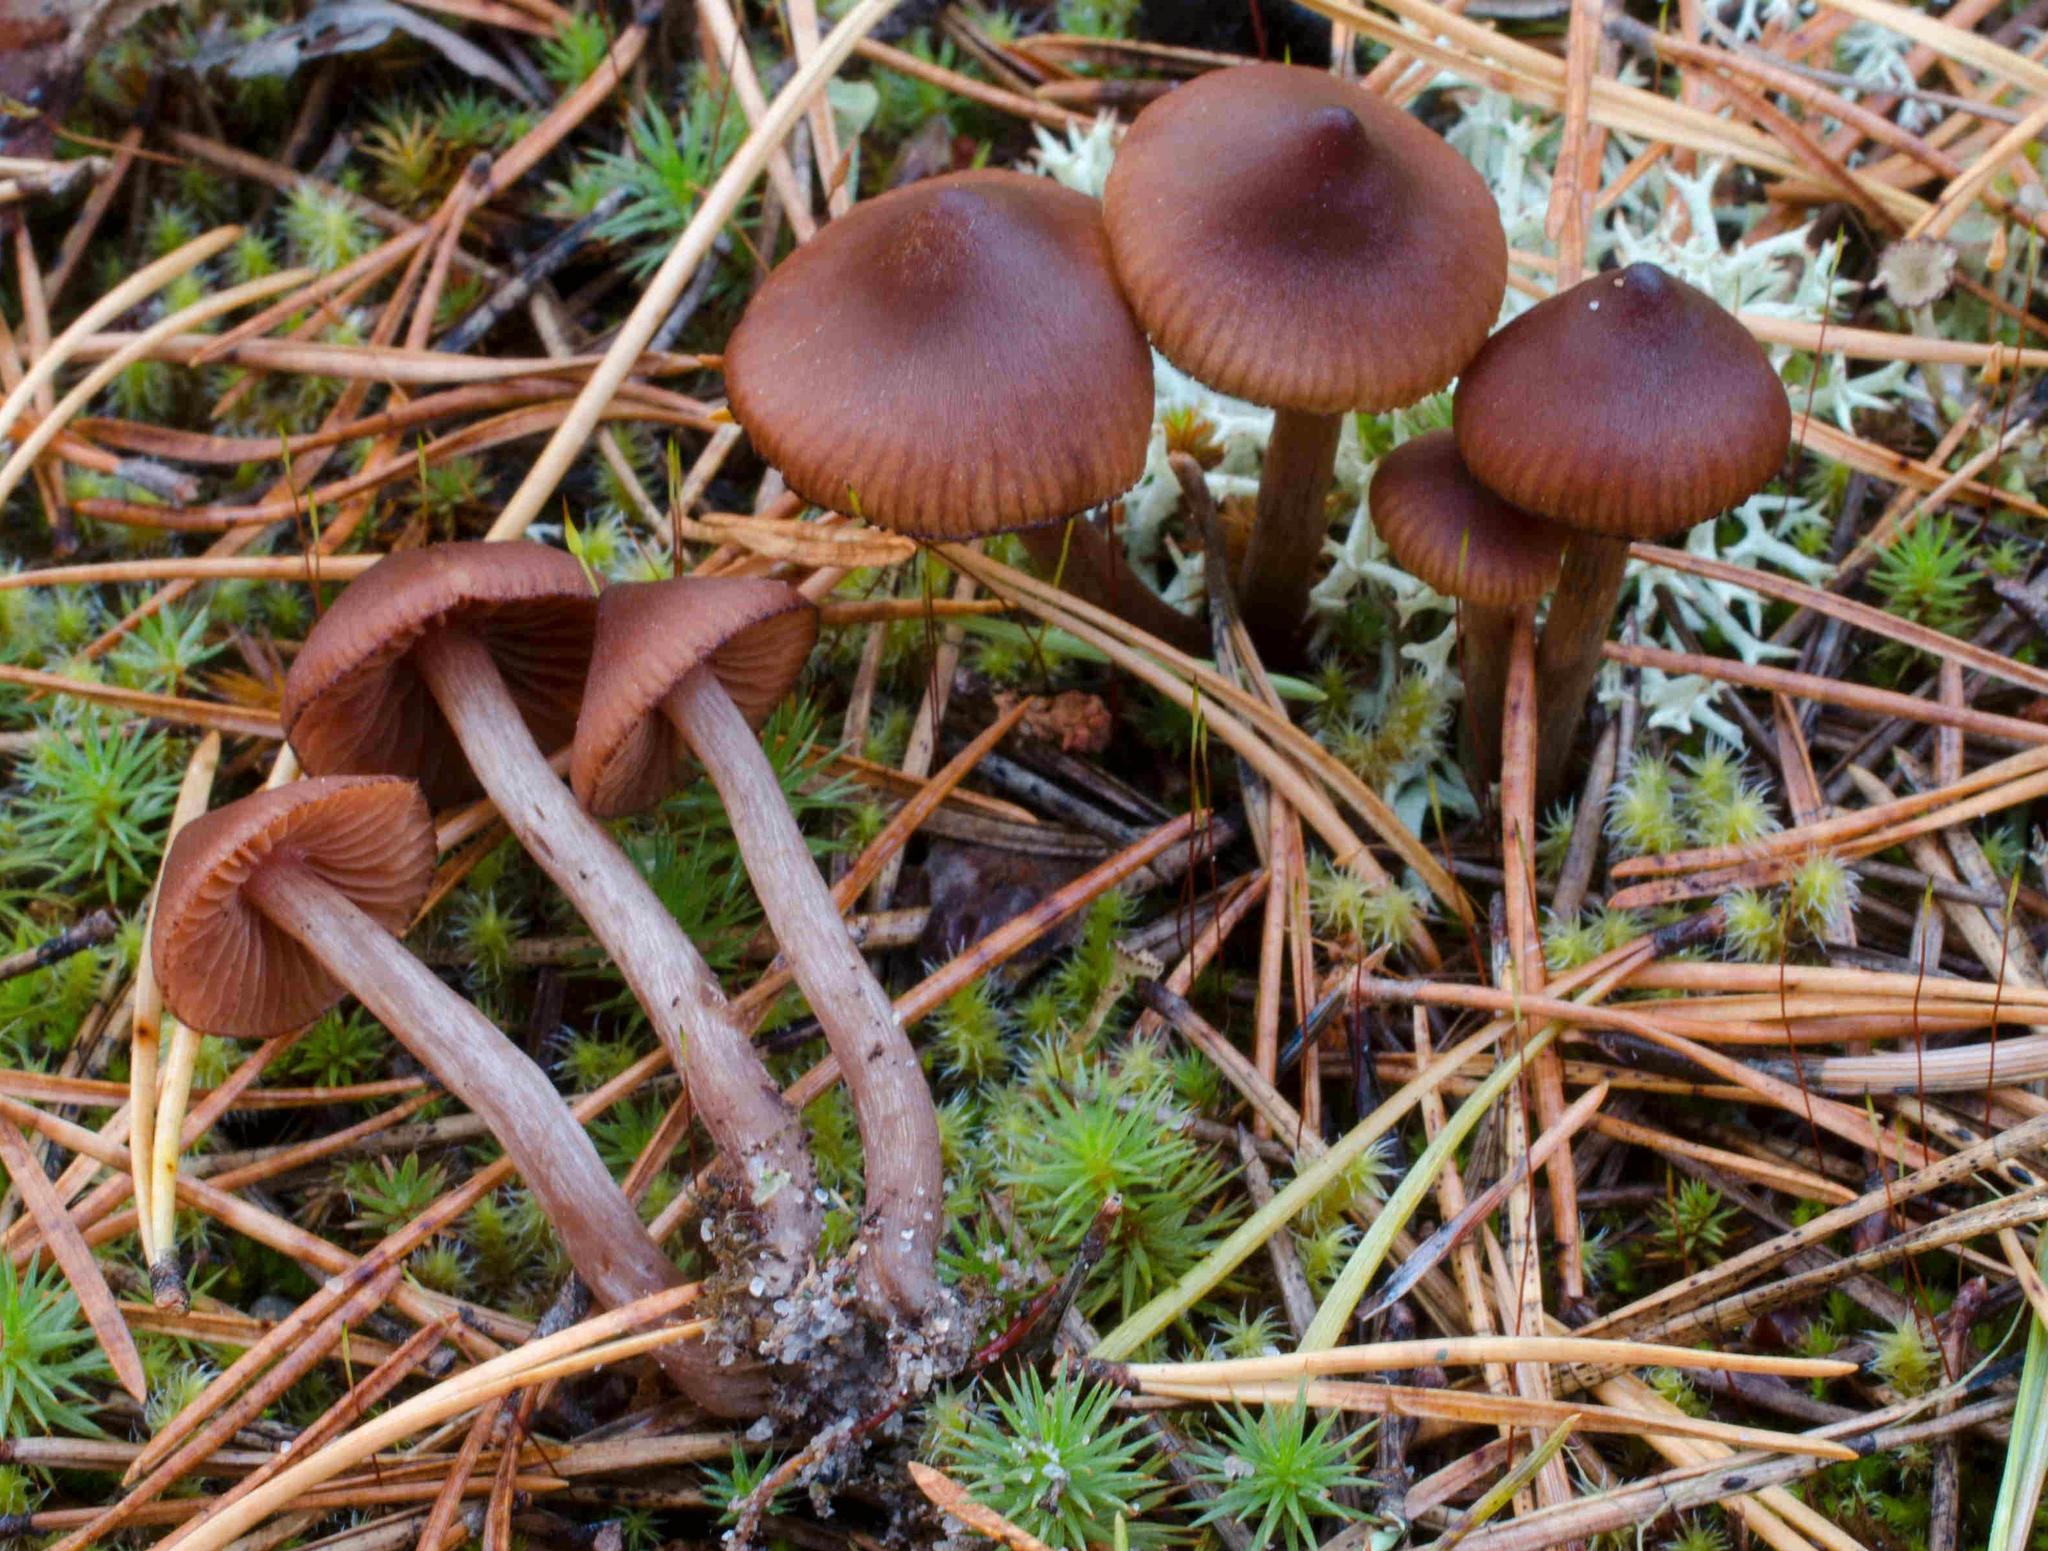 Biologists are discovering a new species every day in Norway